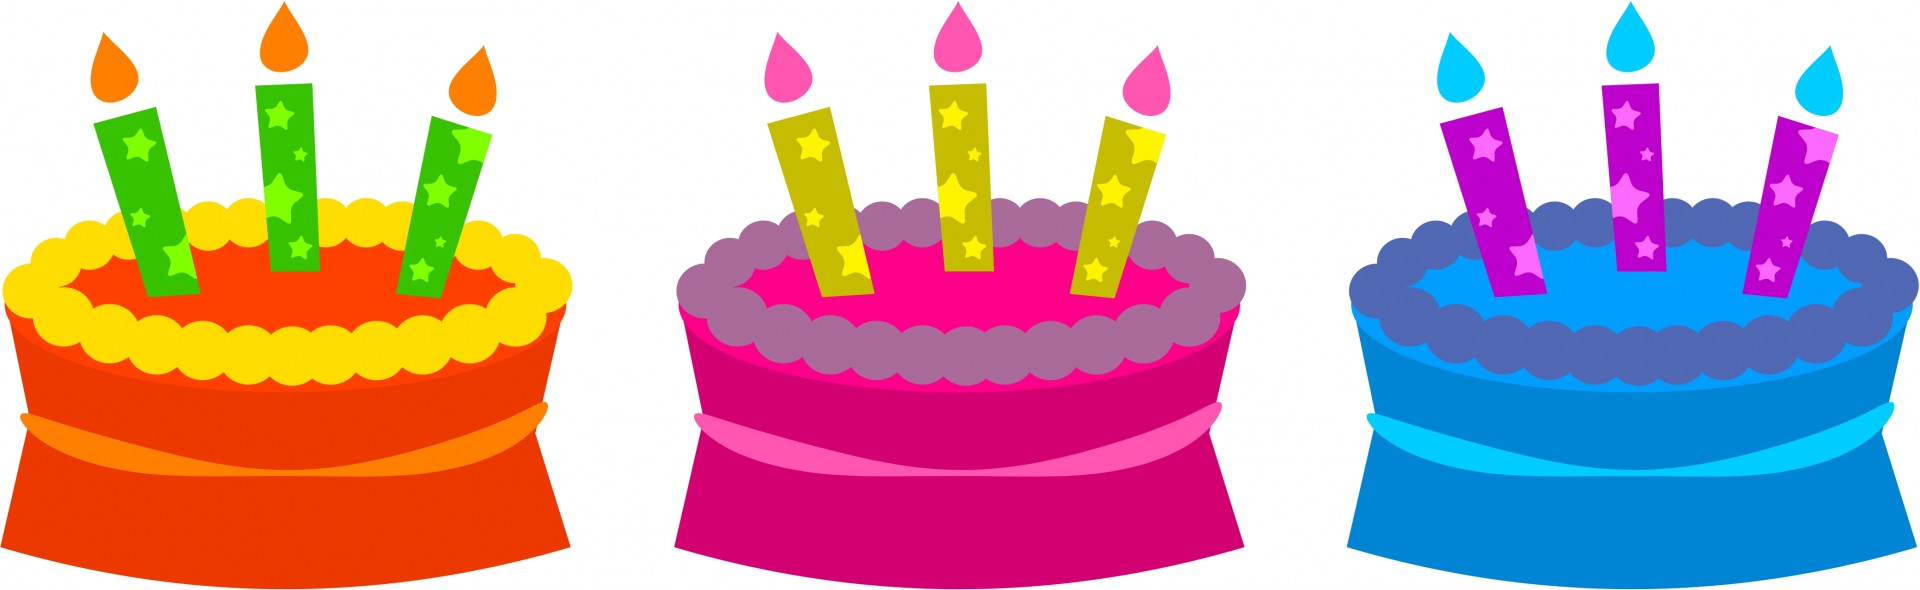 Birthday Cake Border Download Png Clipart